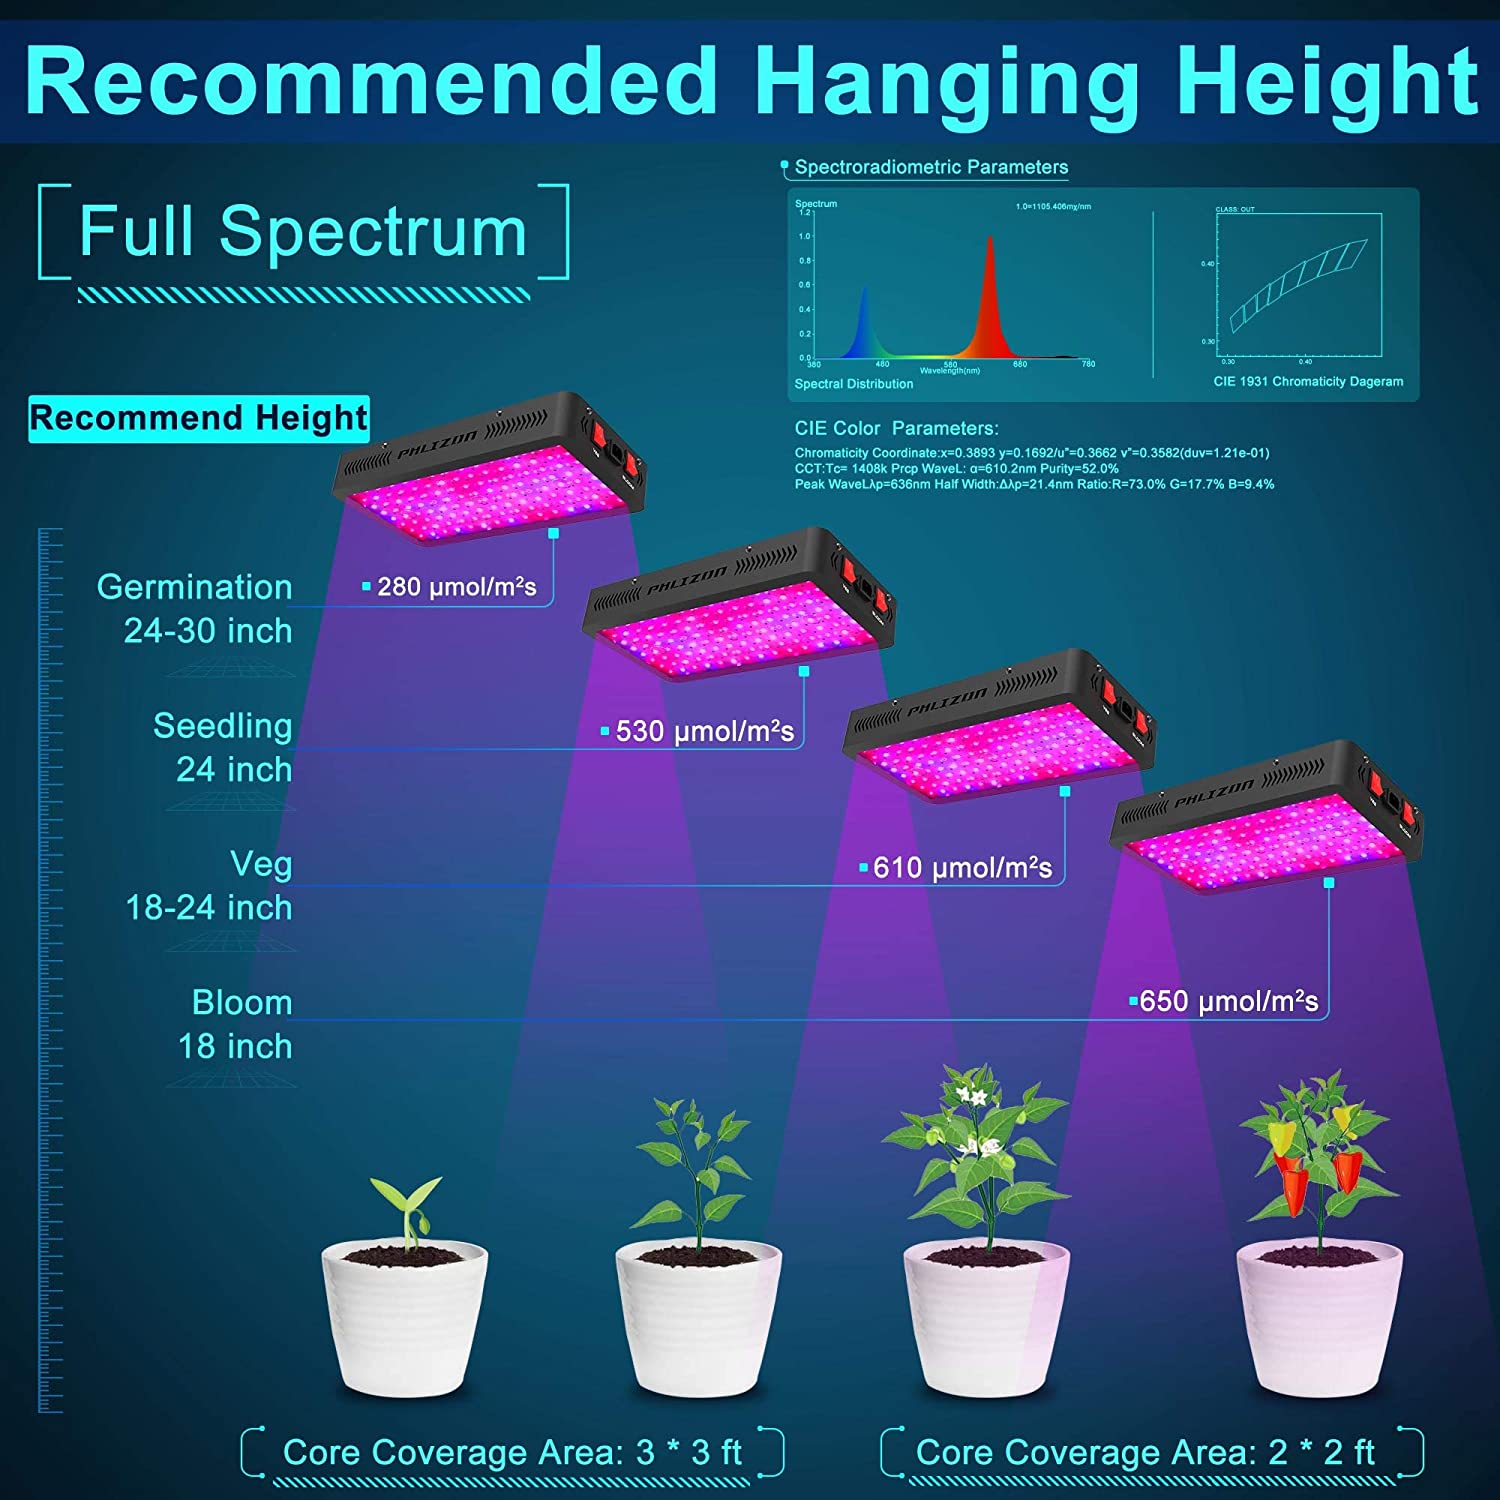 Phlizon 1200W LED Plant Grow Light,with Thermometer Humidity Monitor